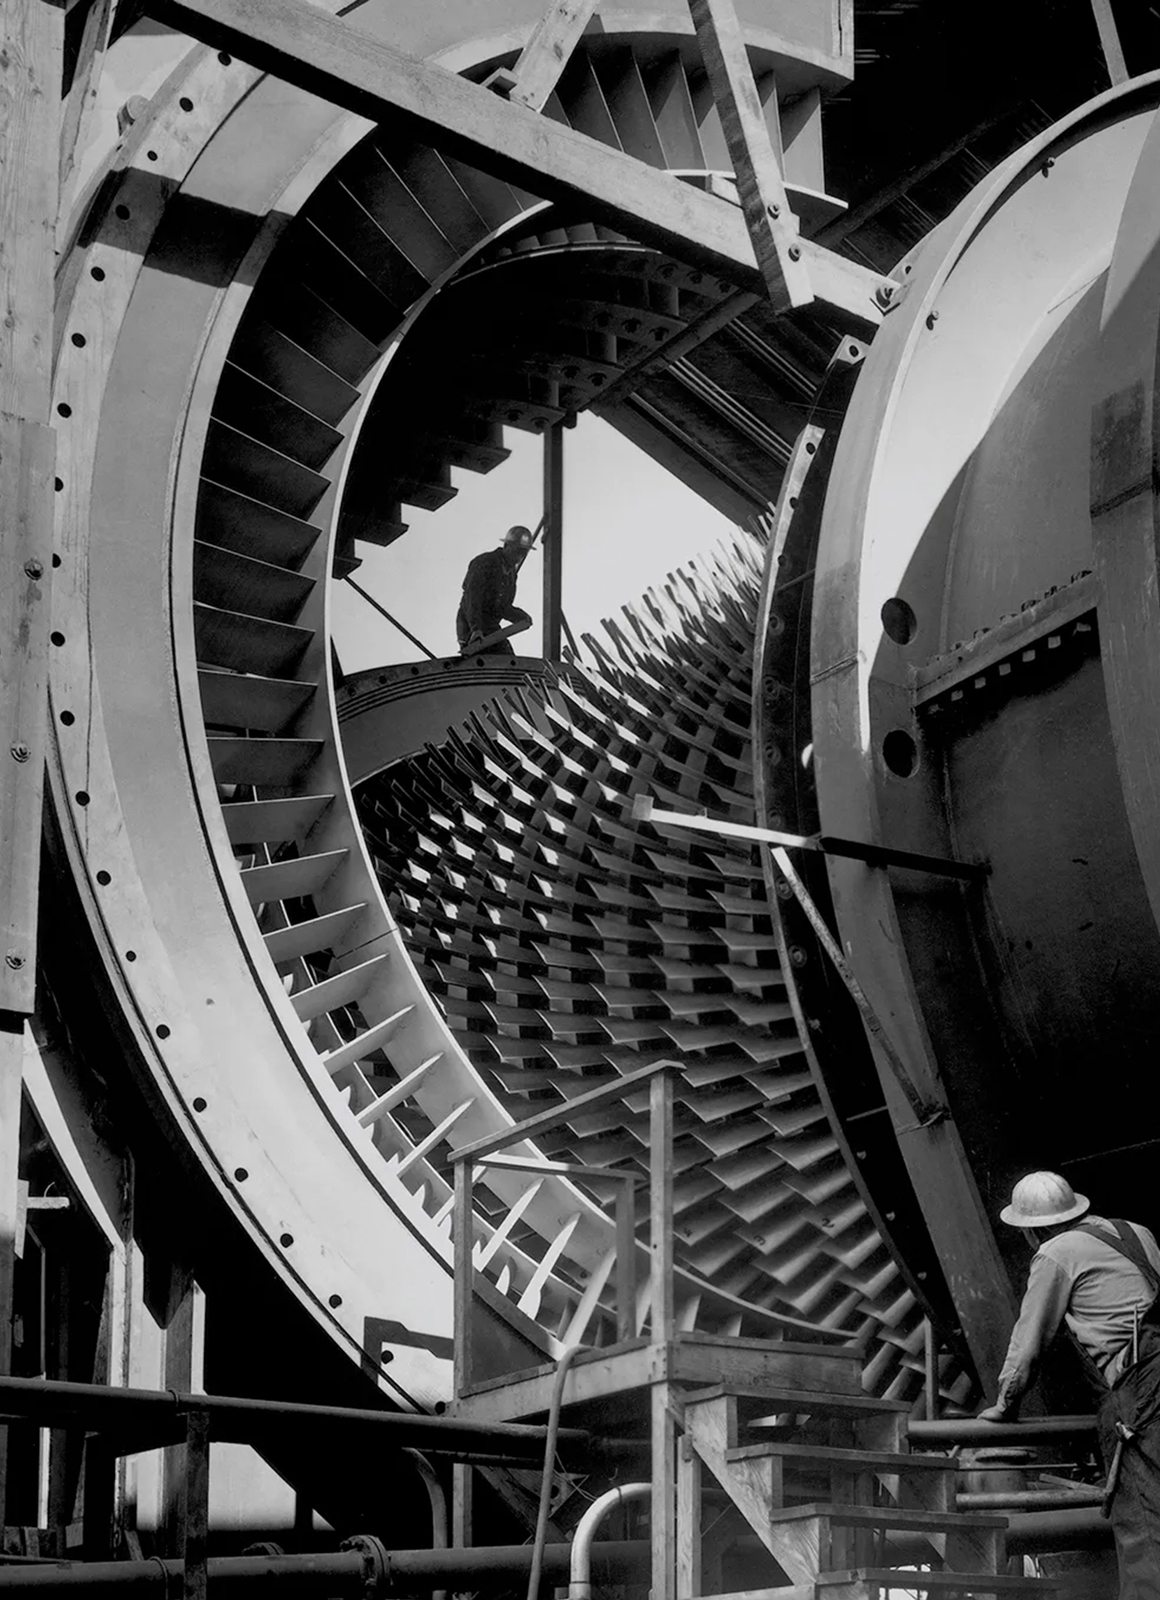 A man wearing a white hard hat examines a huge industrial machine made of large circular discs with short, tightly spaced, fanlike blades.